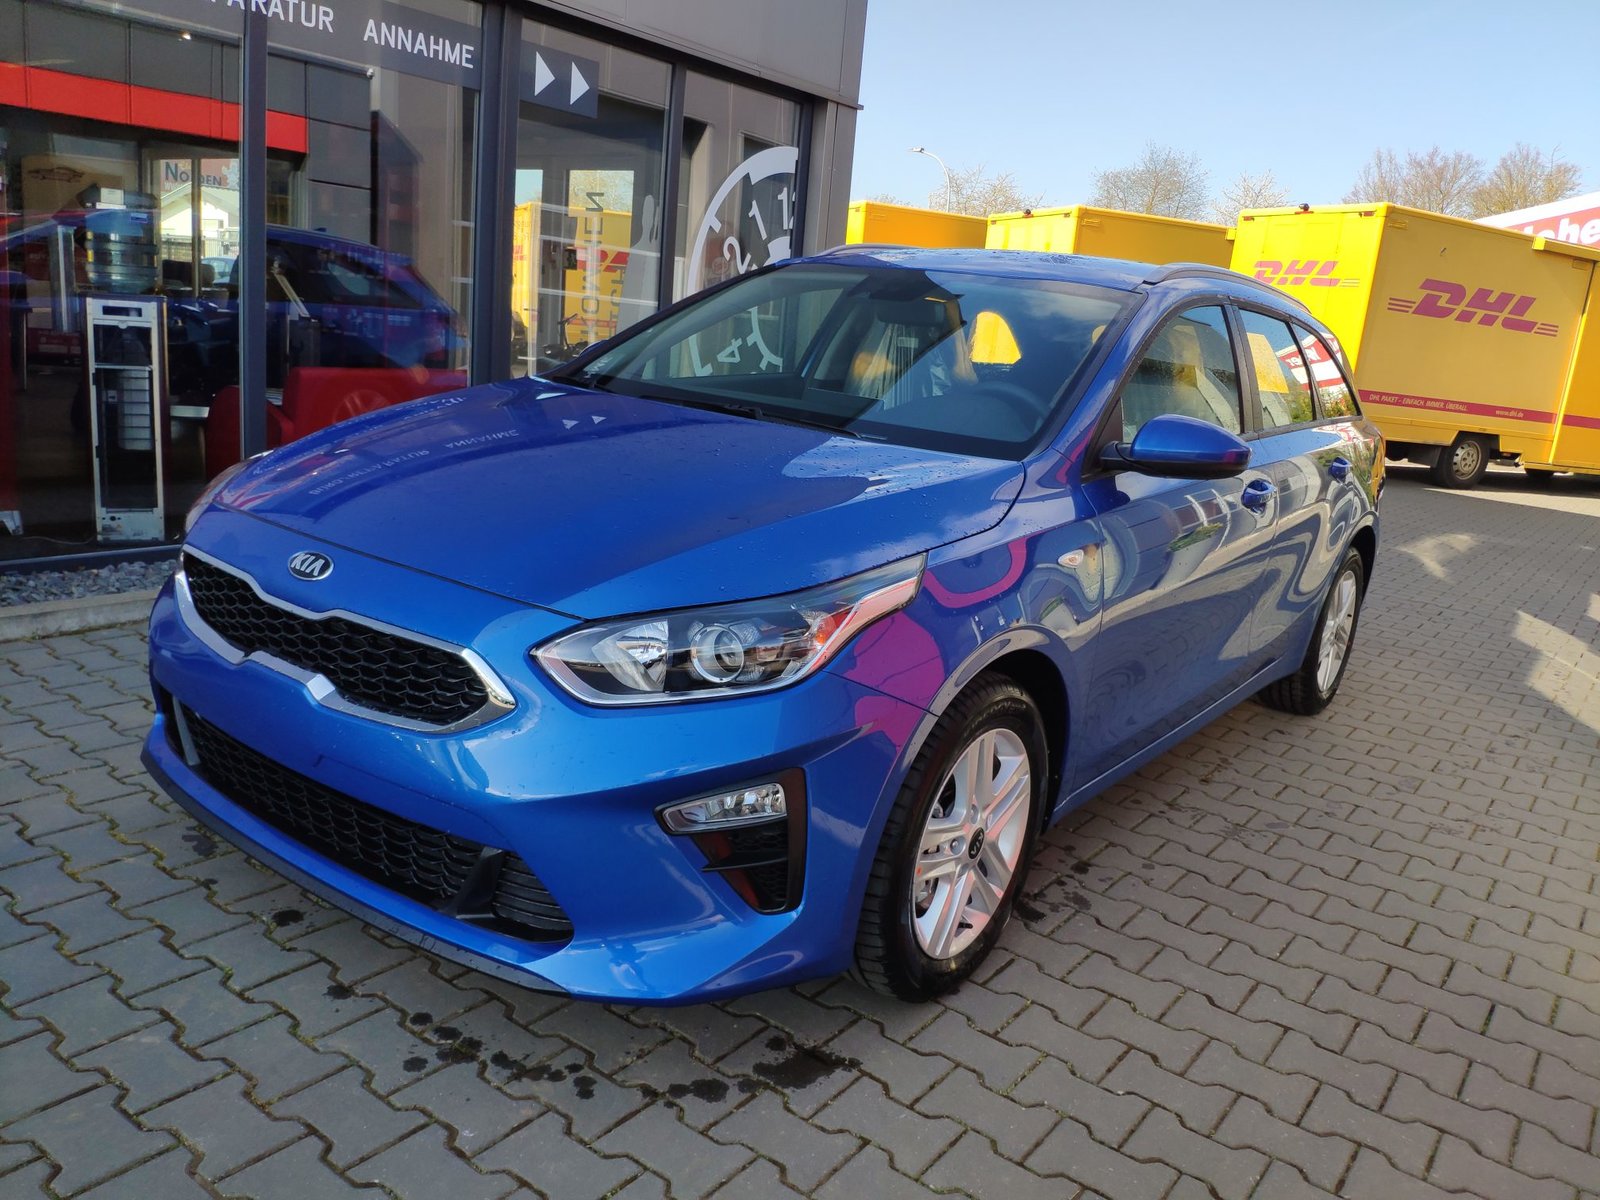 KIA CEED Cee'd 160PS SW Kamera*Sitzheizung*App-Connect! Autosoft BV, Enschede